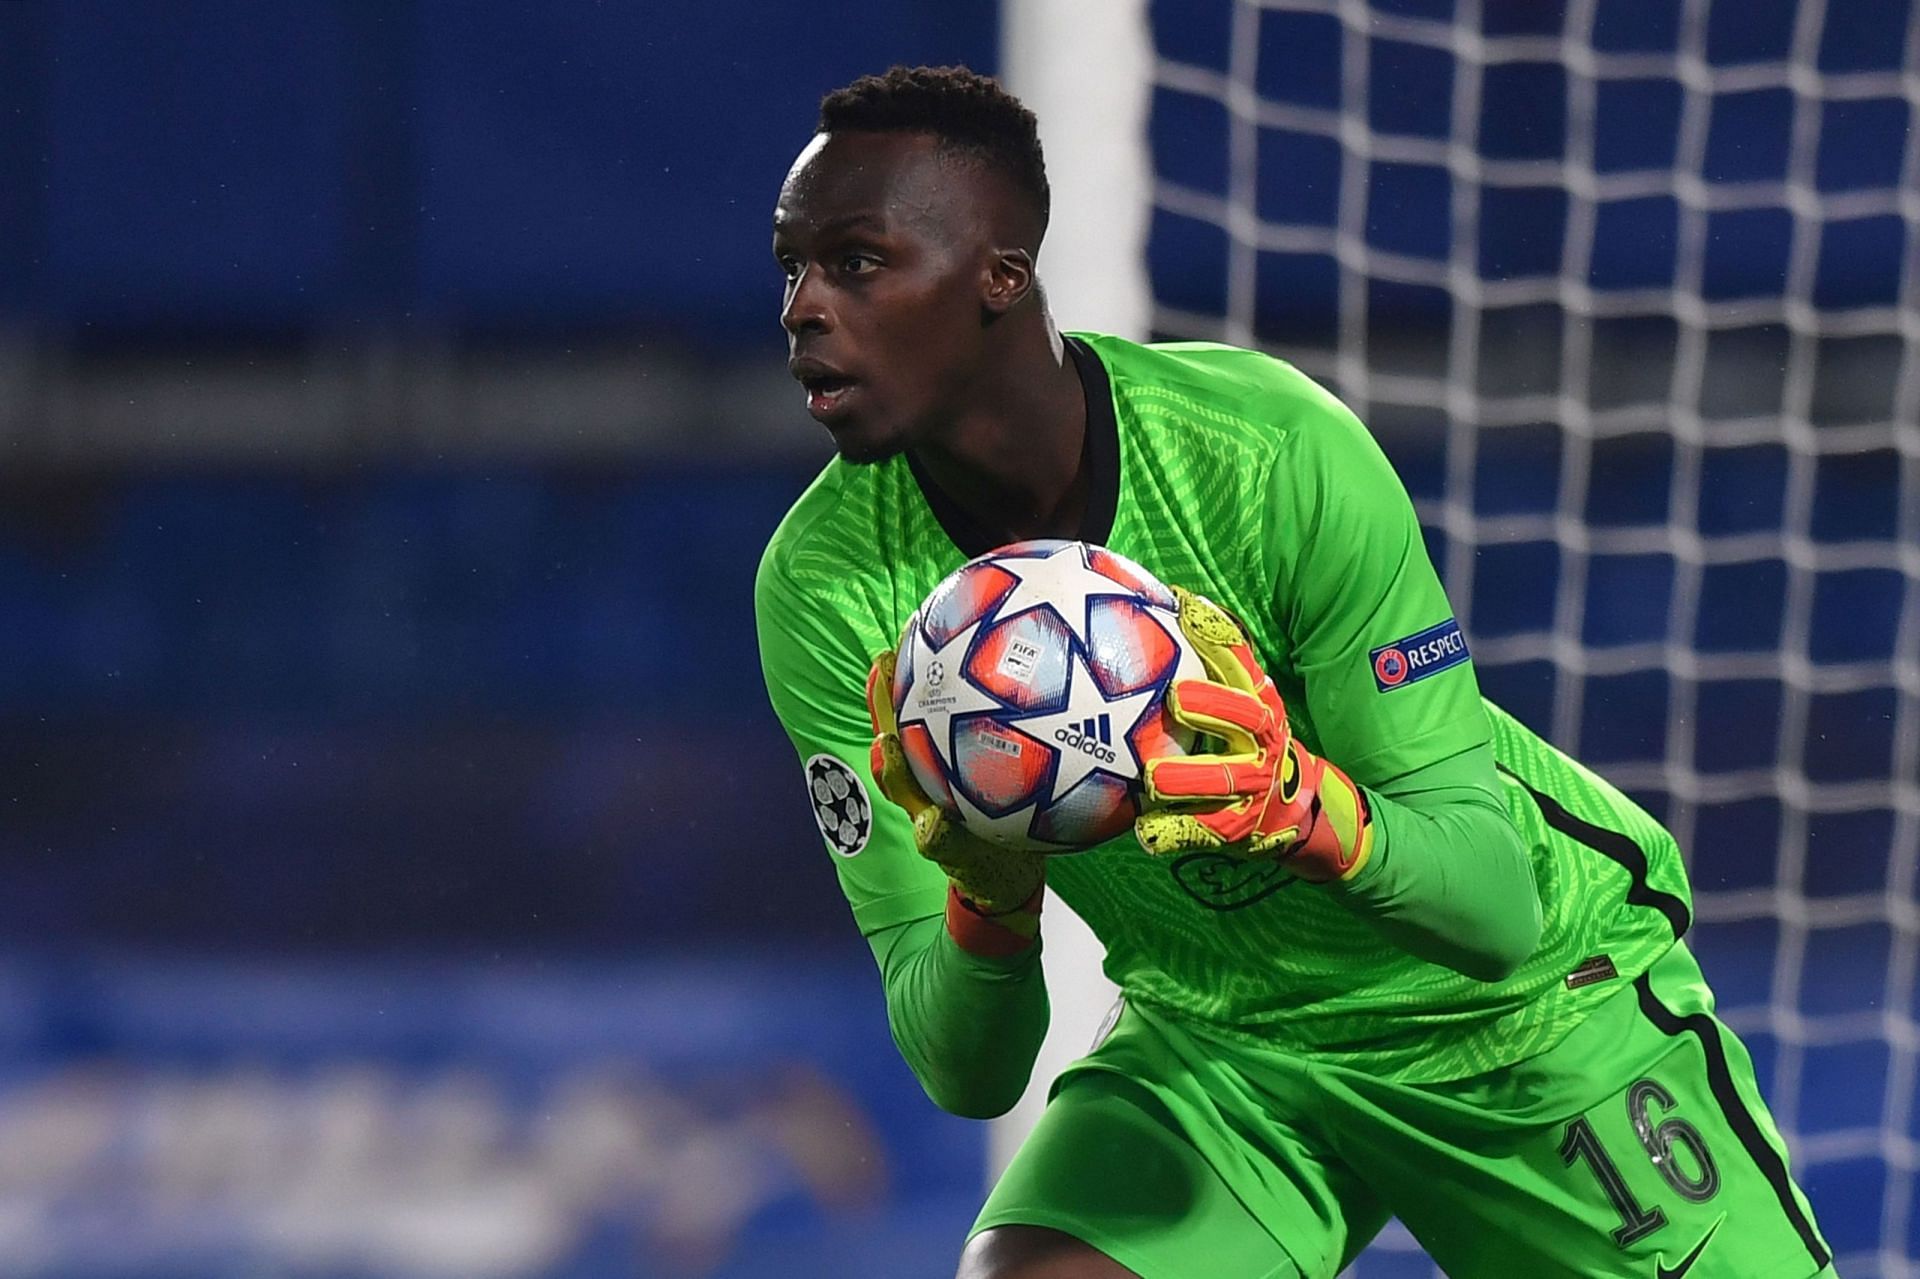 Mendy has kept 35 clean sheets in 60 games for Chelsea.